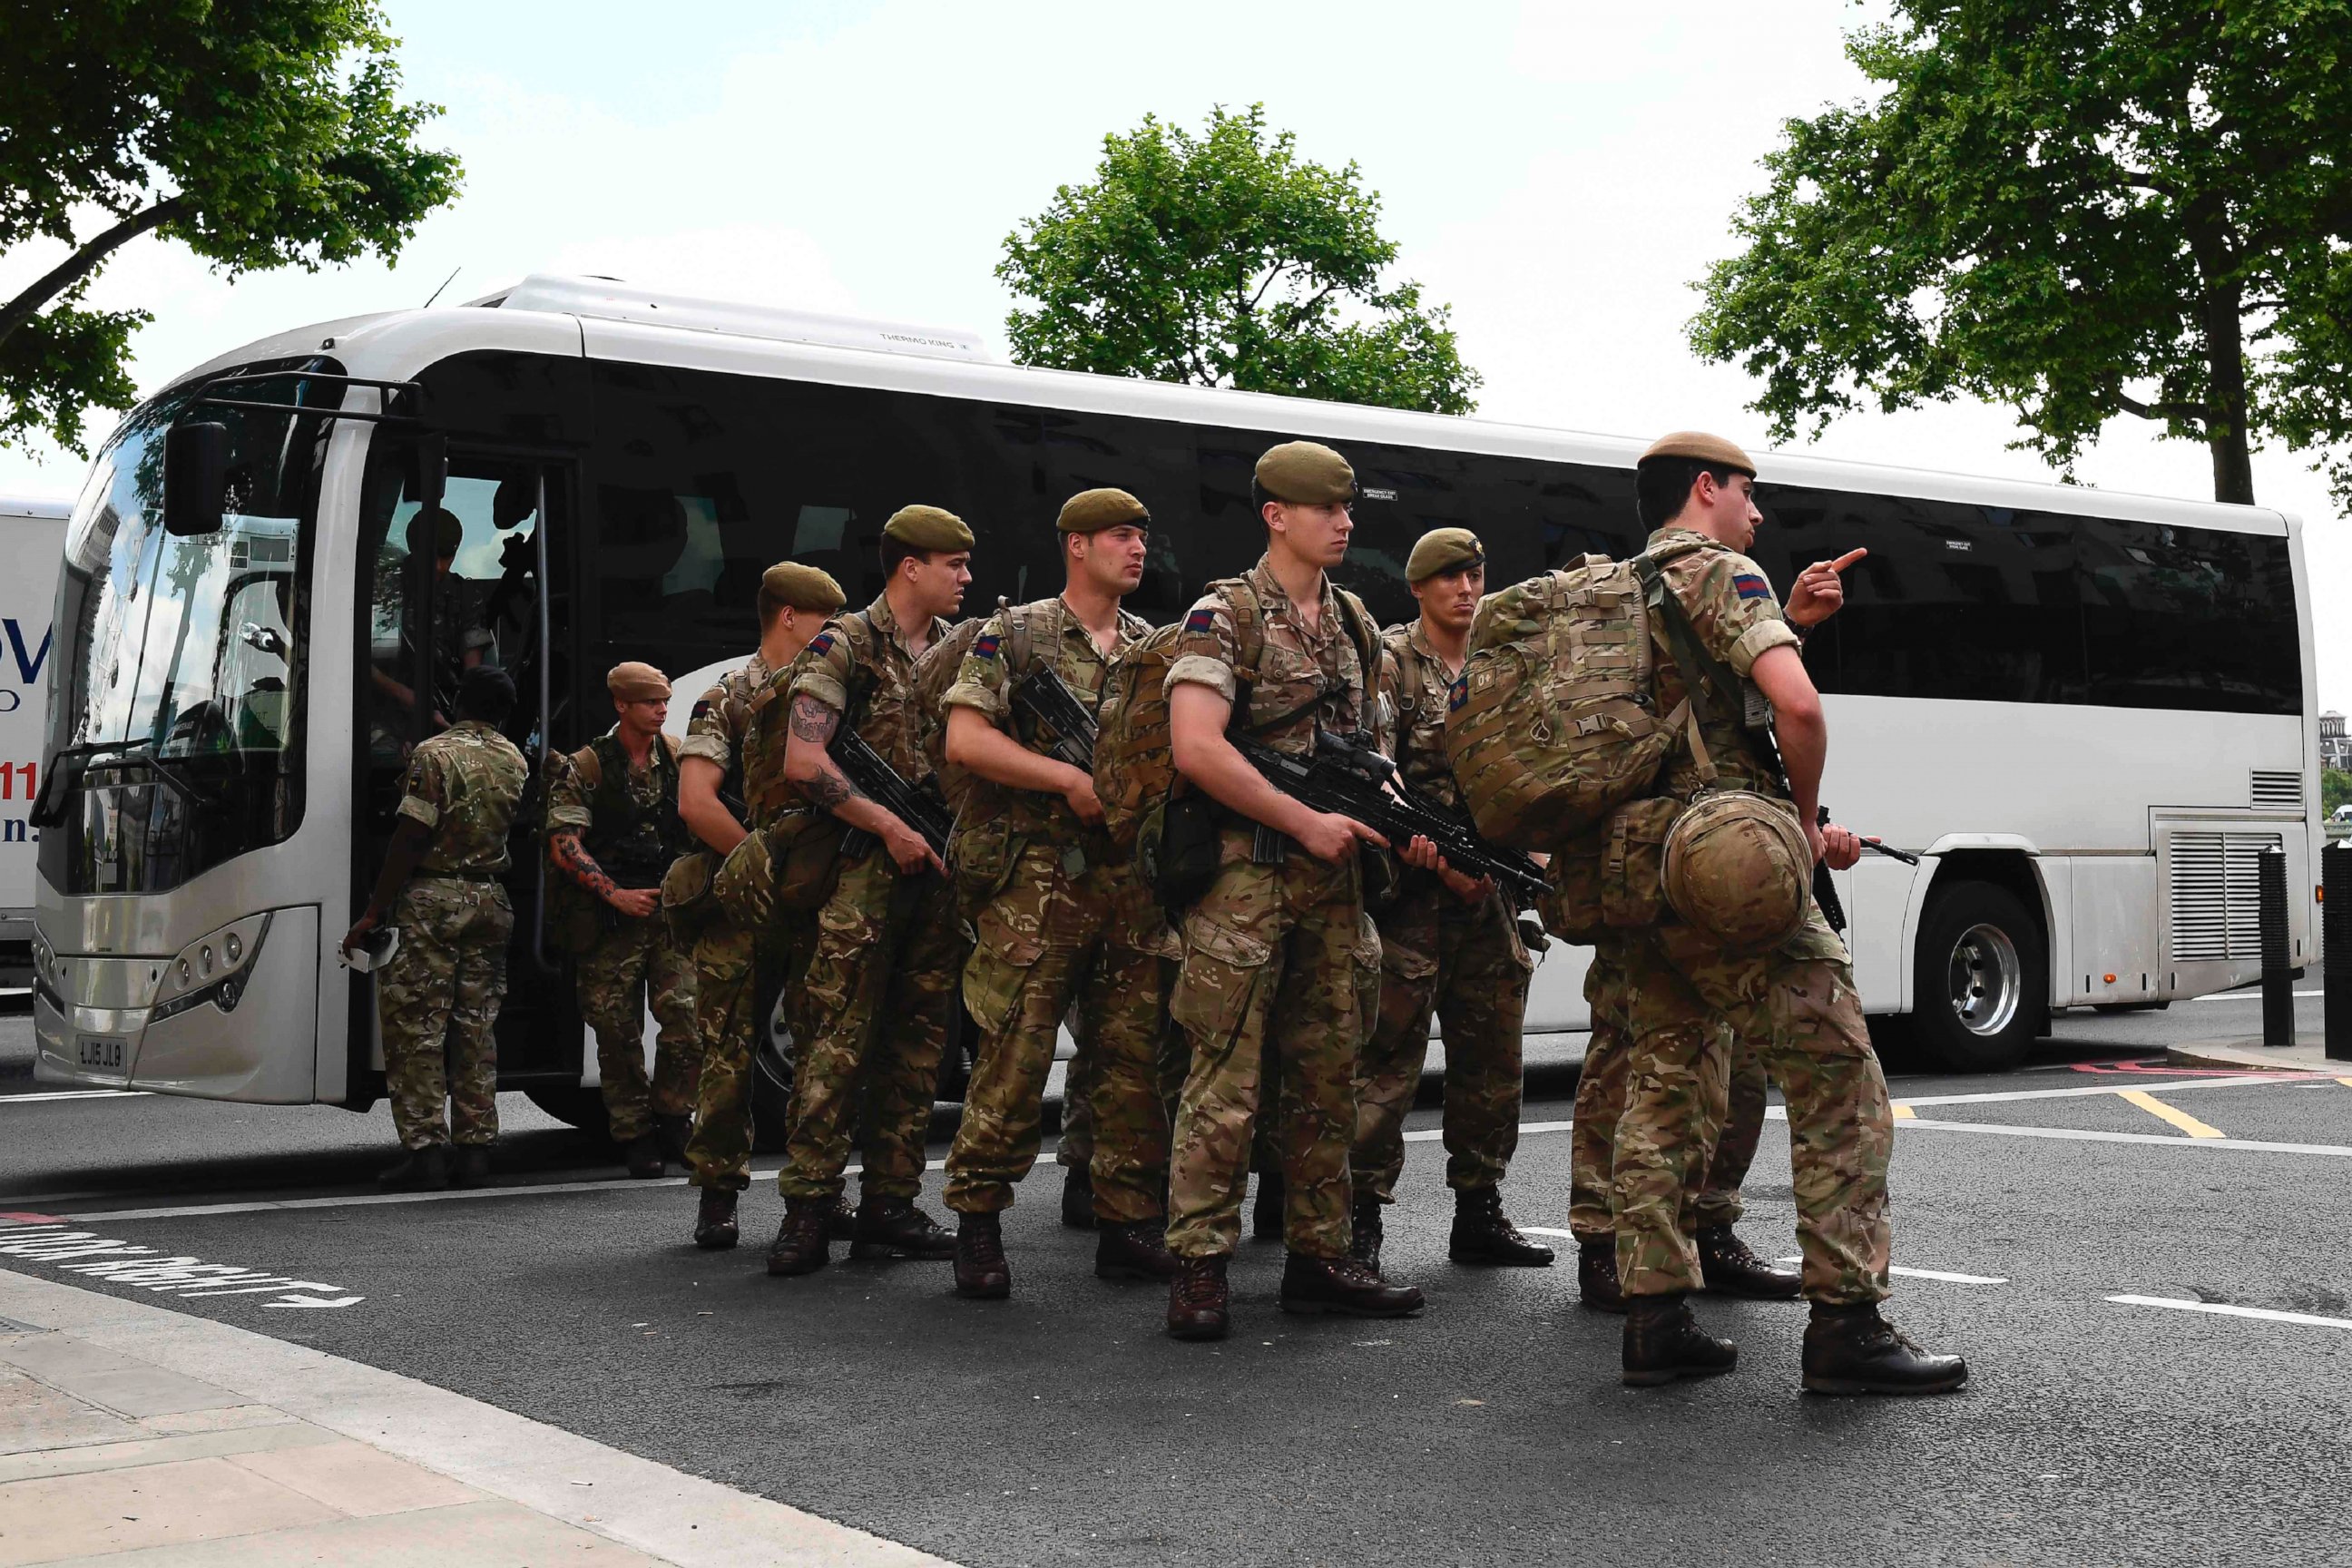 PHOTO: British soldiers arrive by bus and head toward a building next to New Scotland Yard police headquarters near the House of Parliament in London, May 24, 2017.